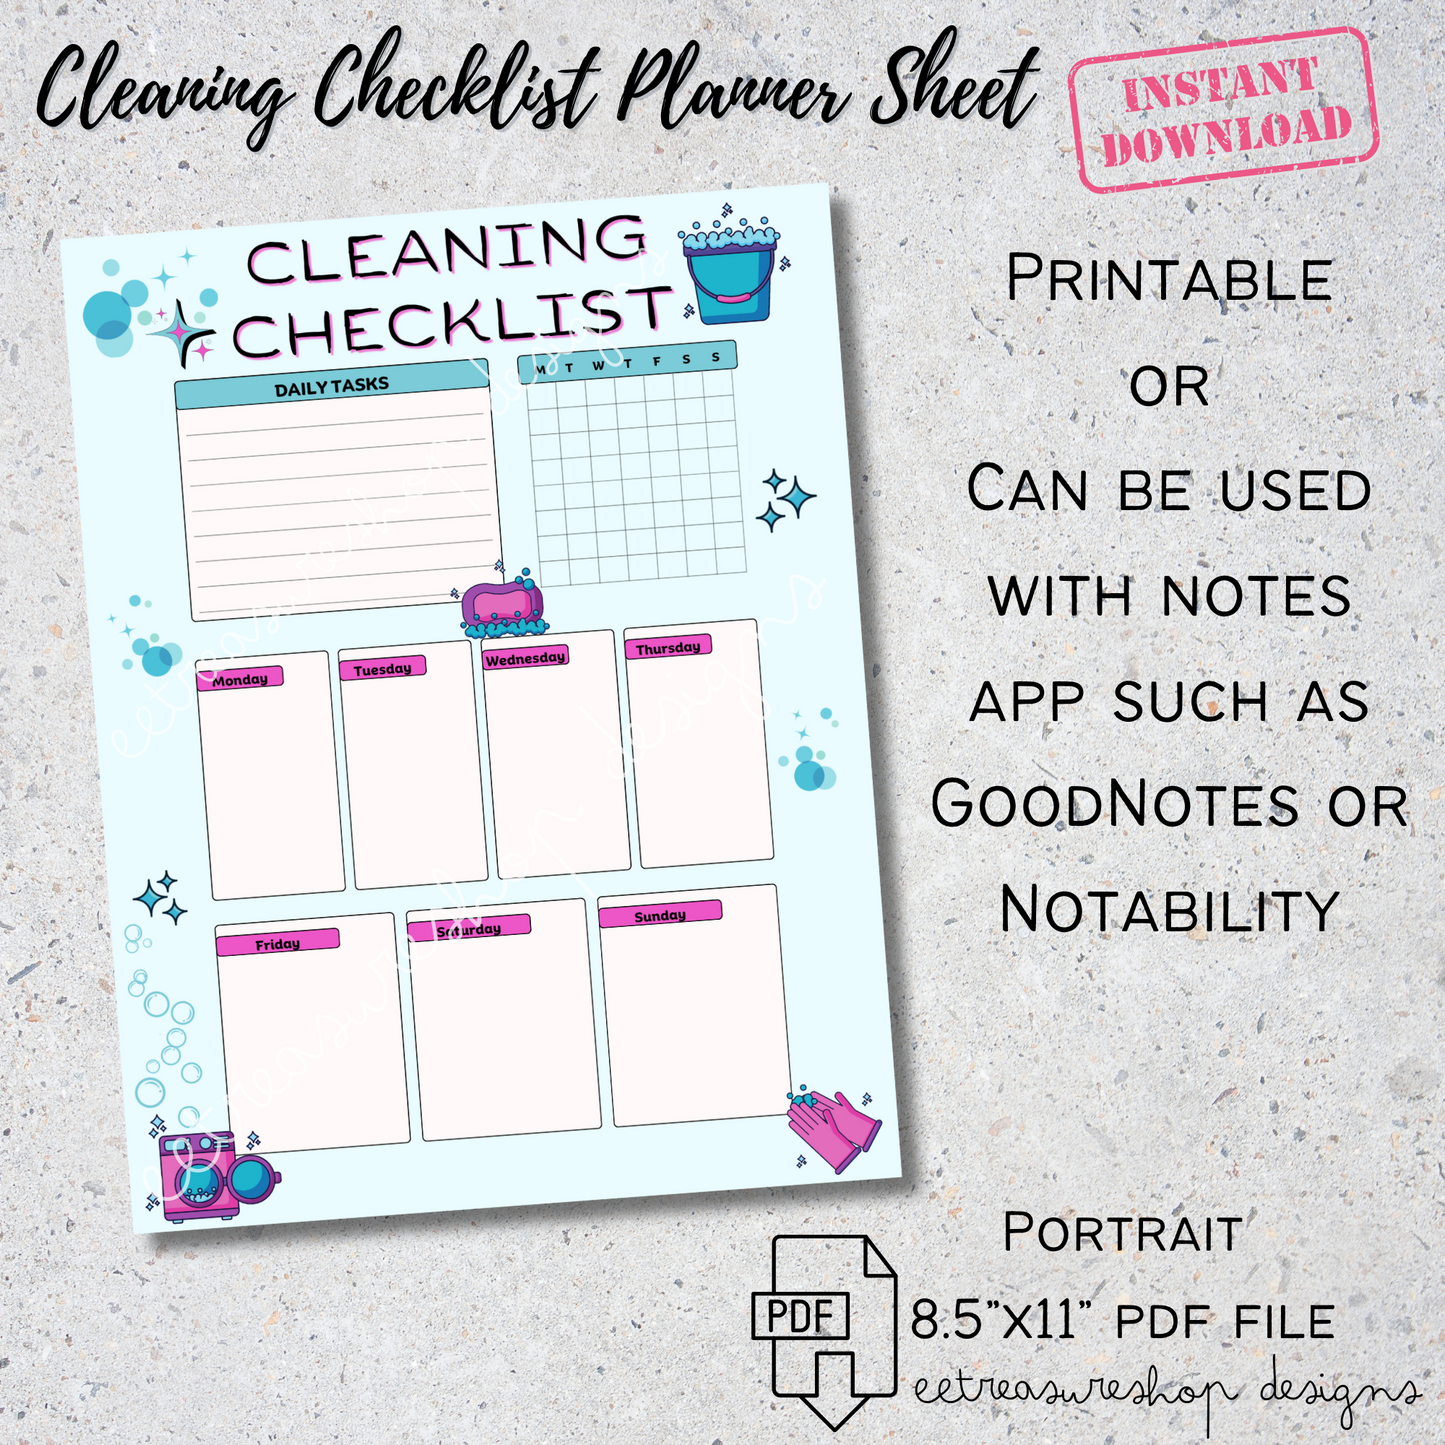 Cleaning Checklist Printable PDF, Digital Download, GoodNotes Cleaning Sheet, iPad Planner